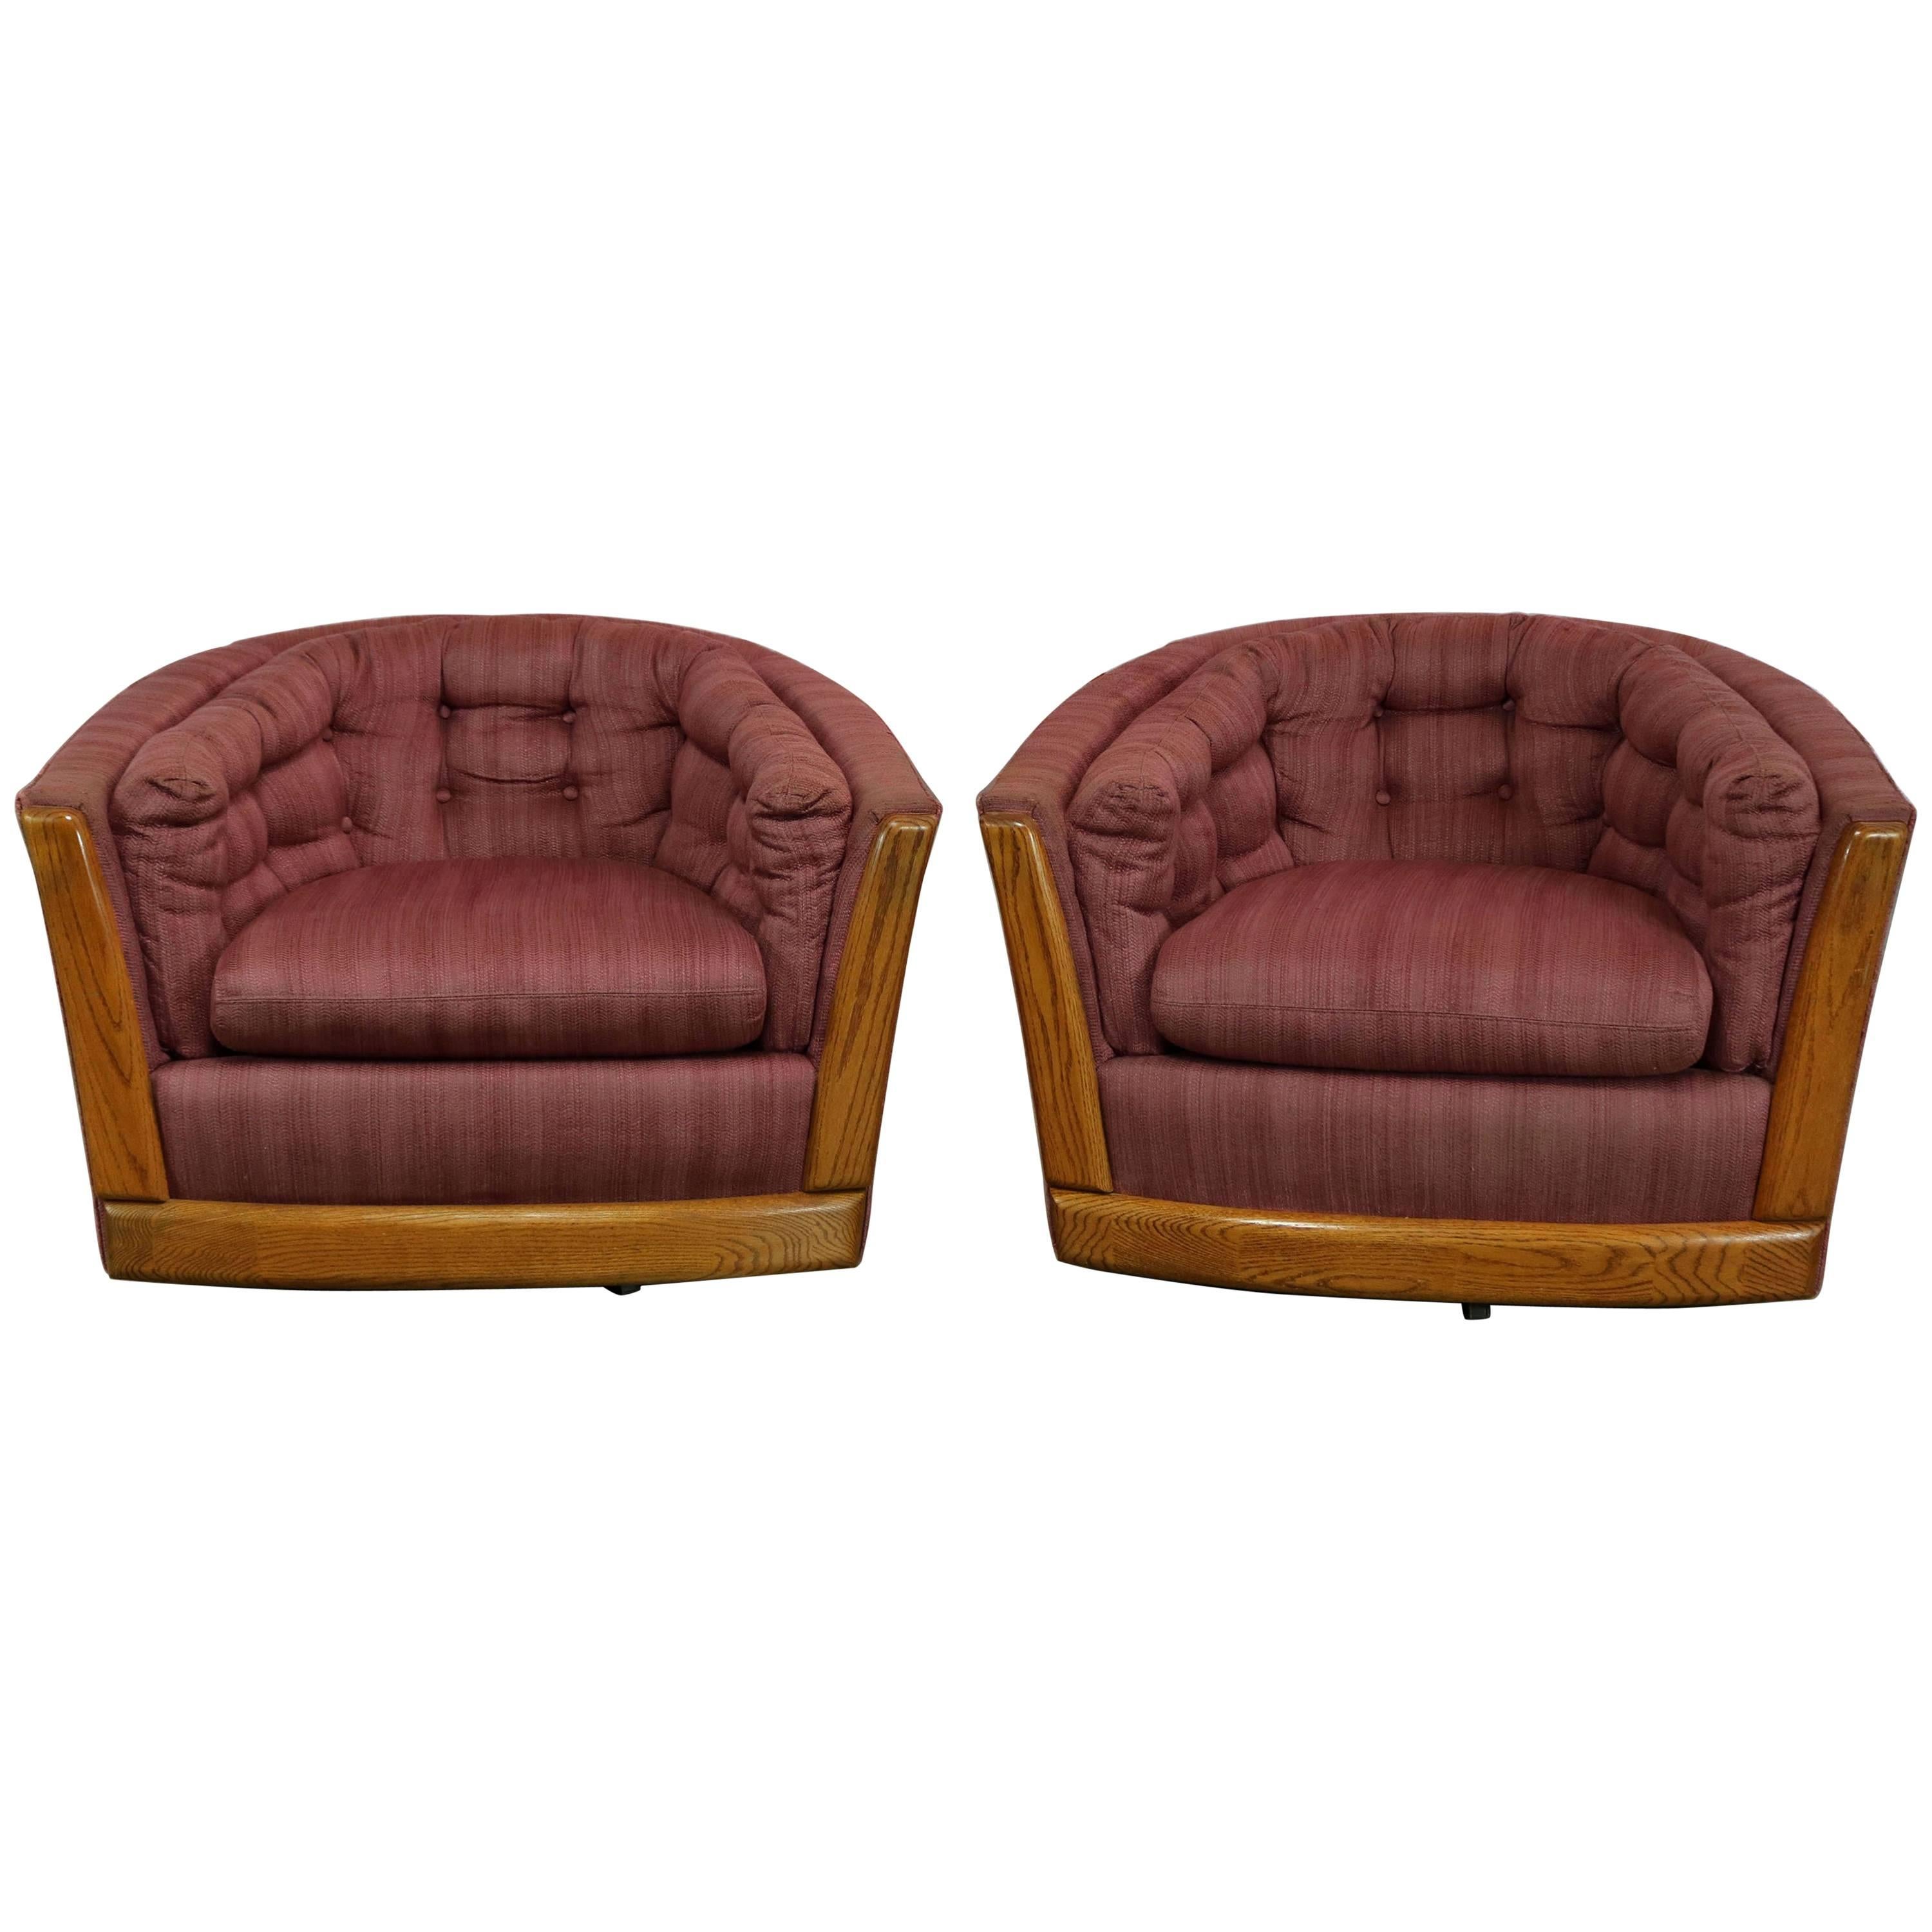 Pair Swivel Barrel Chairs with Oak Trim Style of Milo Baughman or Harvey Probber